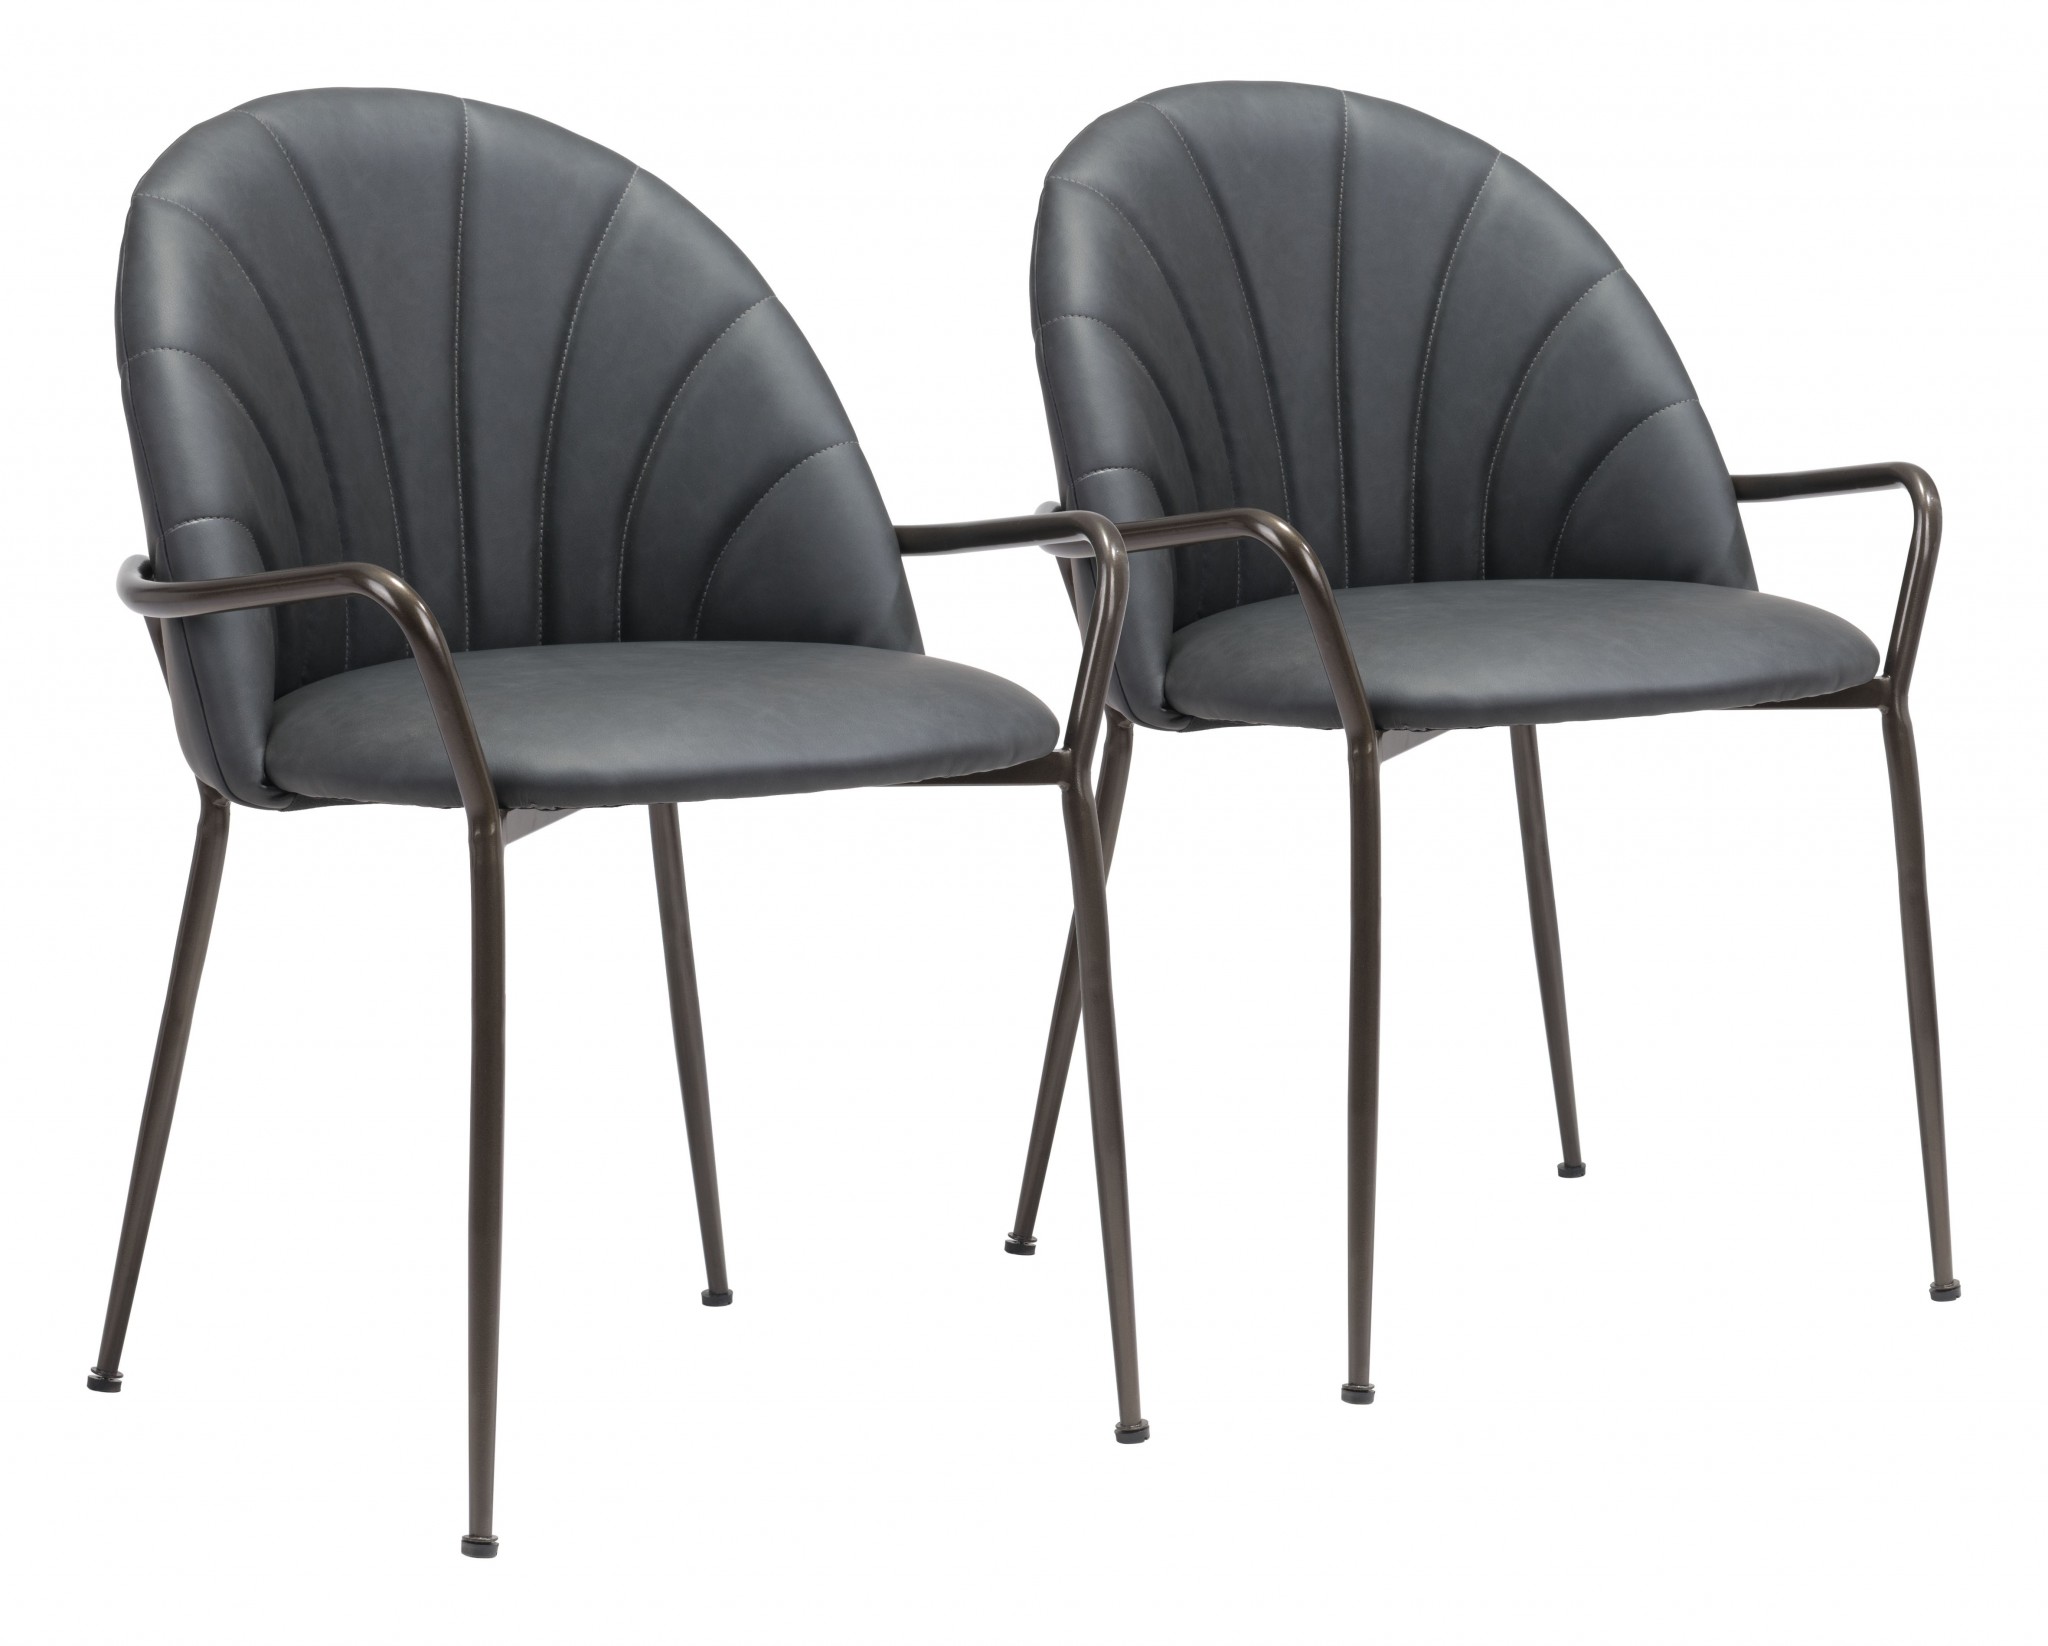 Set of Two Dark Gray Faux Leather Arch Dining Chairs